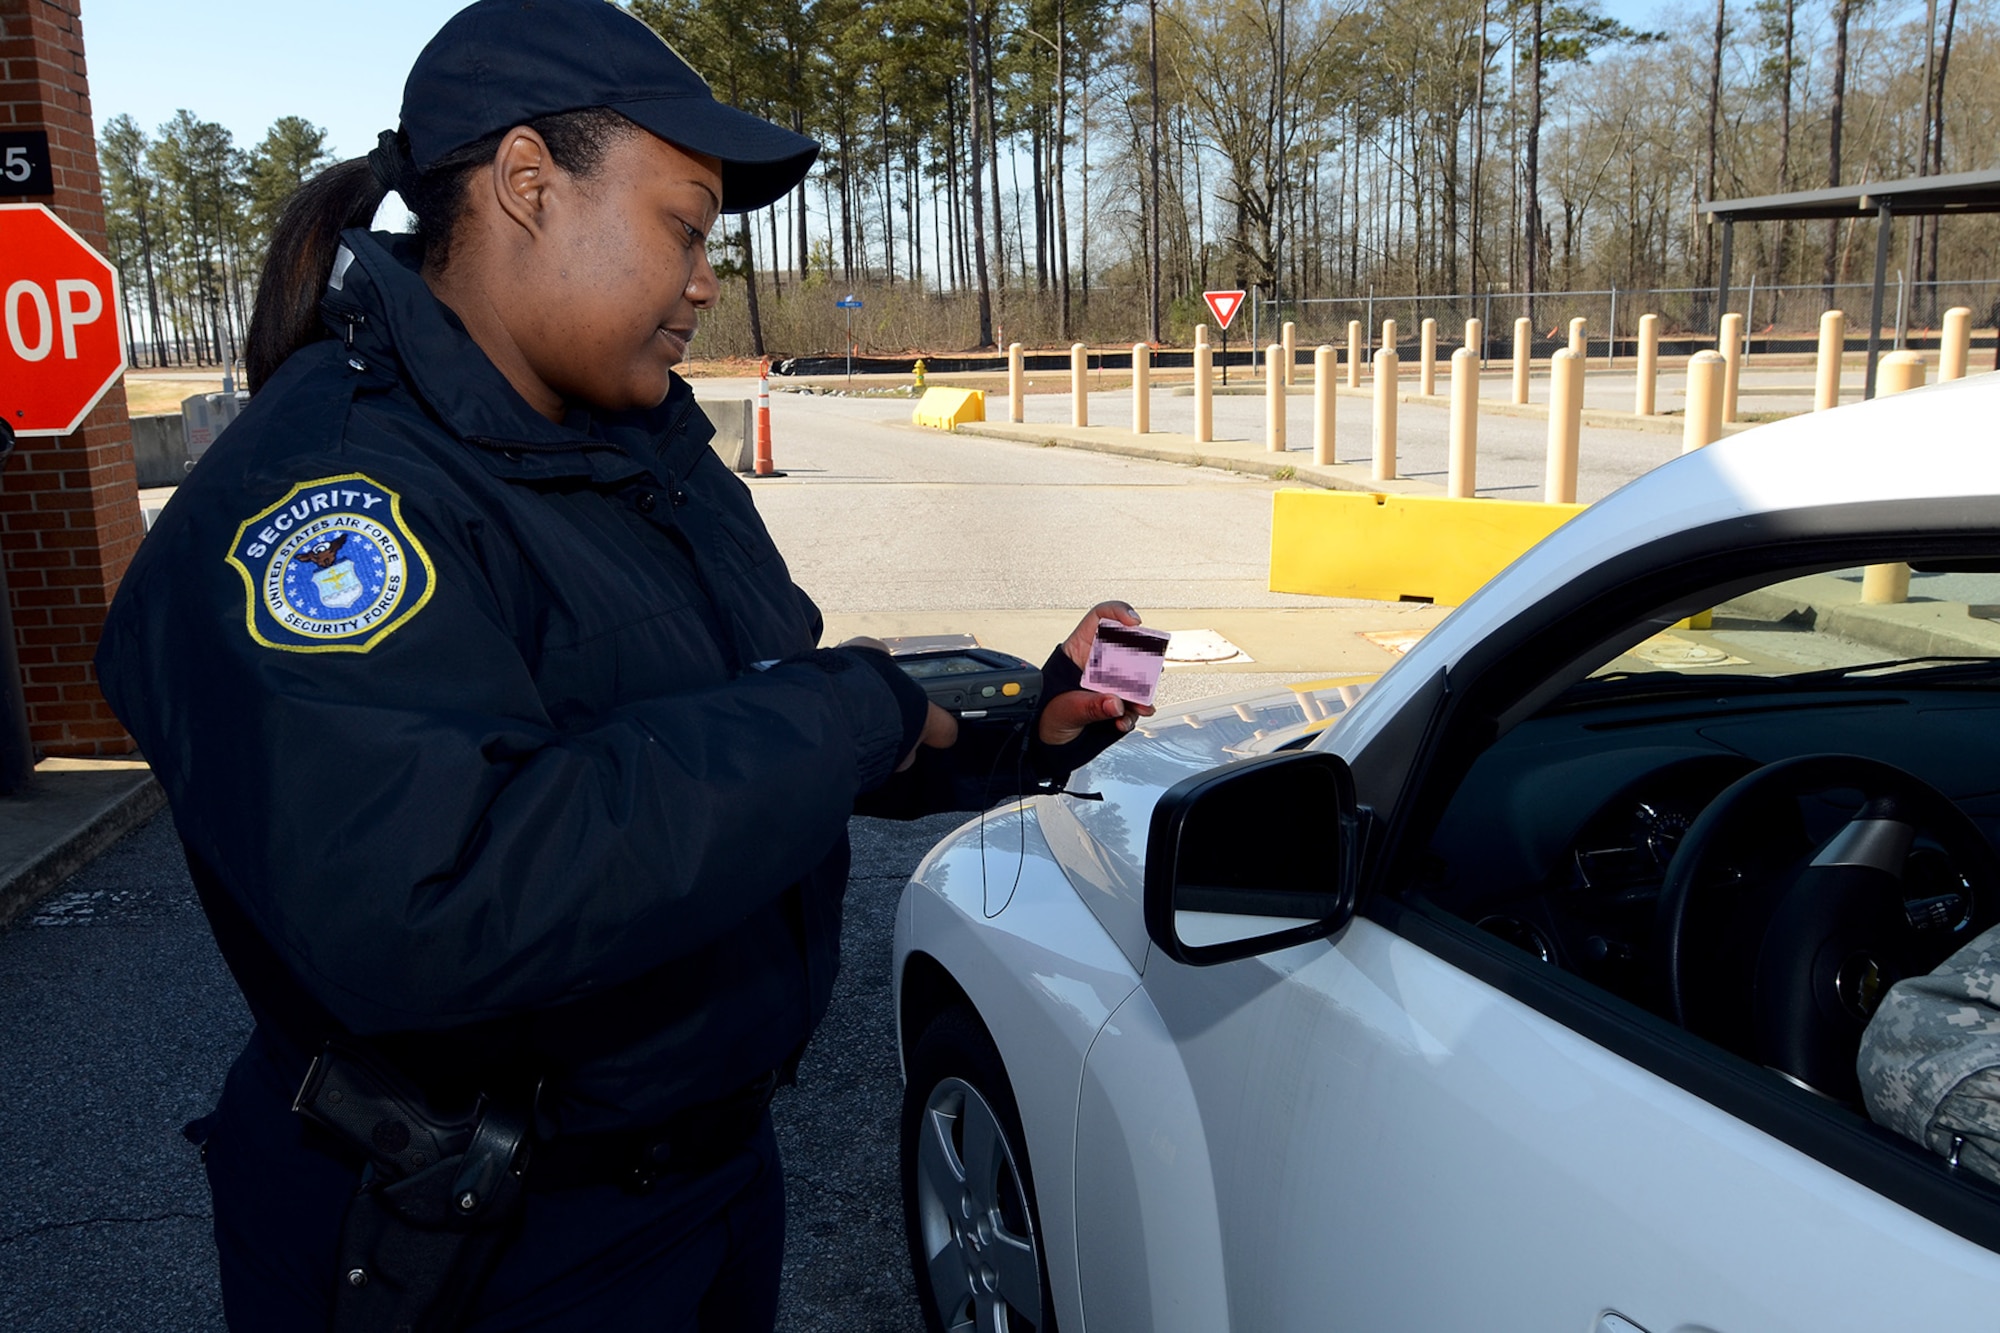 Ms. Veronica Dennis, security forces personnel with the 169th Security Forces Squadron at McEntire Joint National Guard Base, S.C., checks ID cards at the main gate entrance using the Defense Biometric Identification System scanner, March 28, 2013.
(U.S. Air National Guard photo by Tech. Sgt. Caycee Watson/Released)